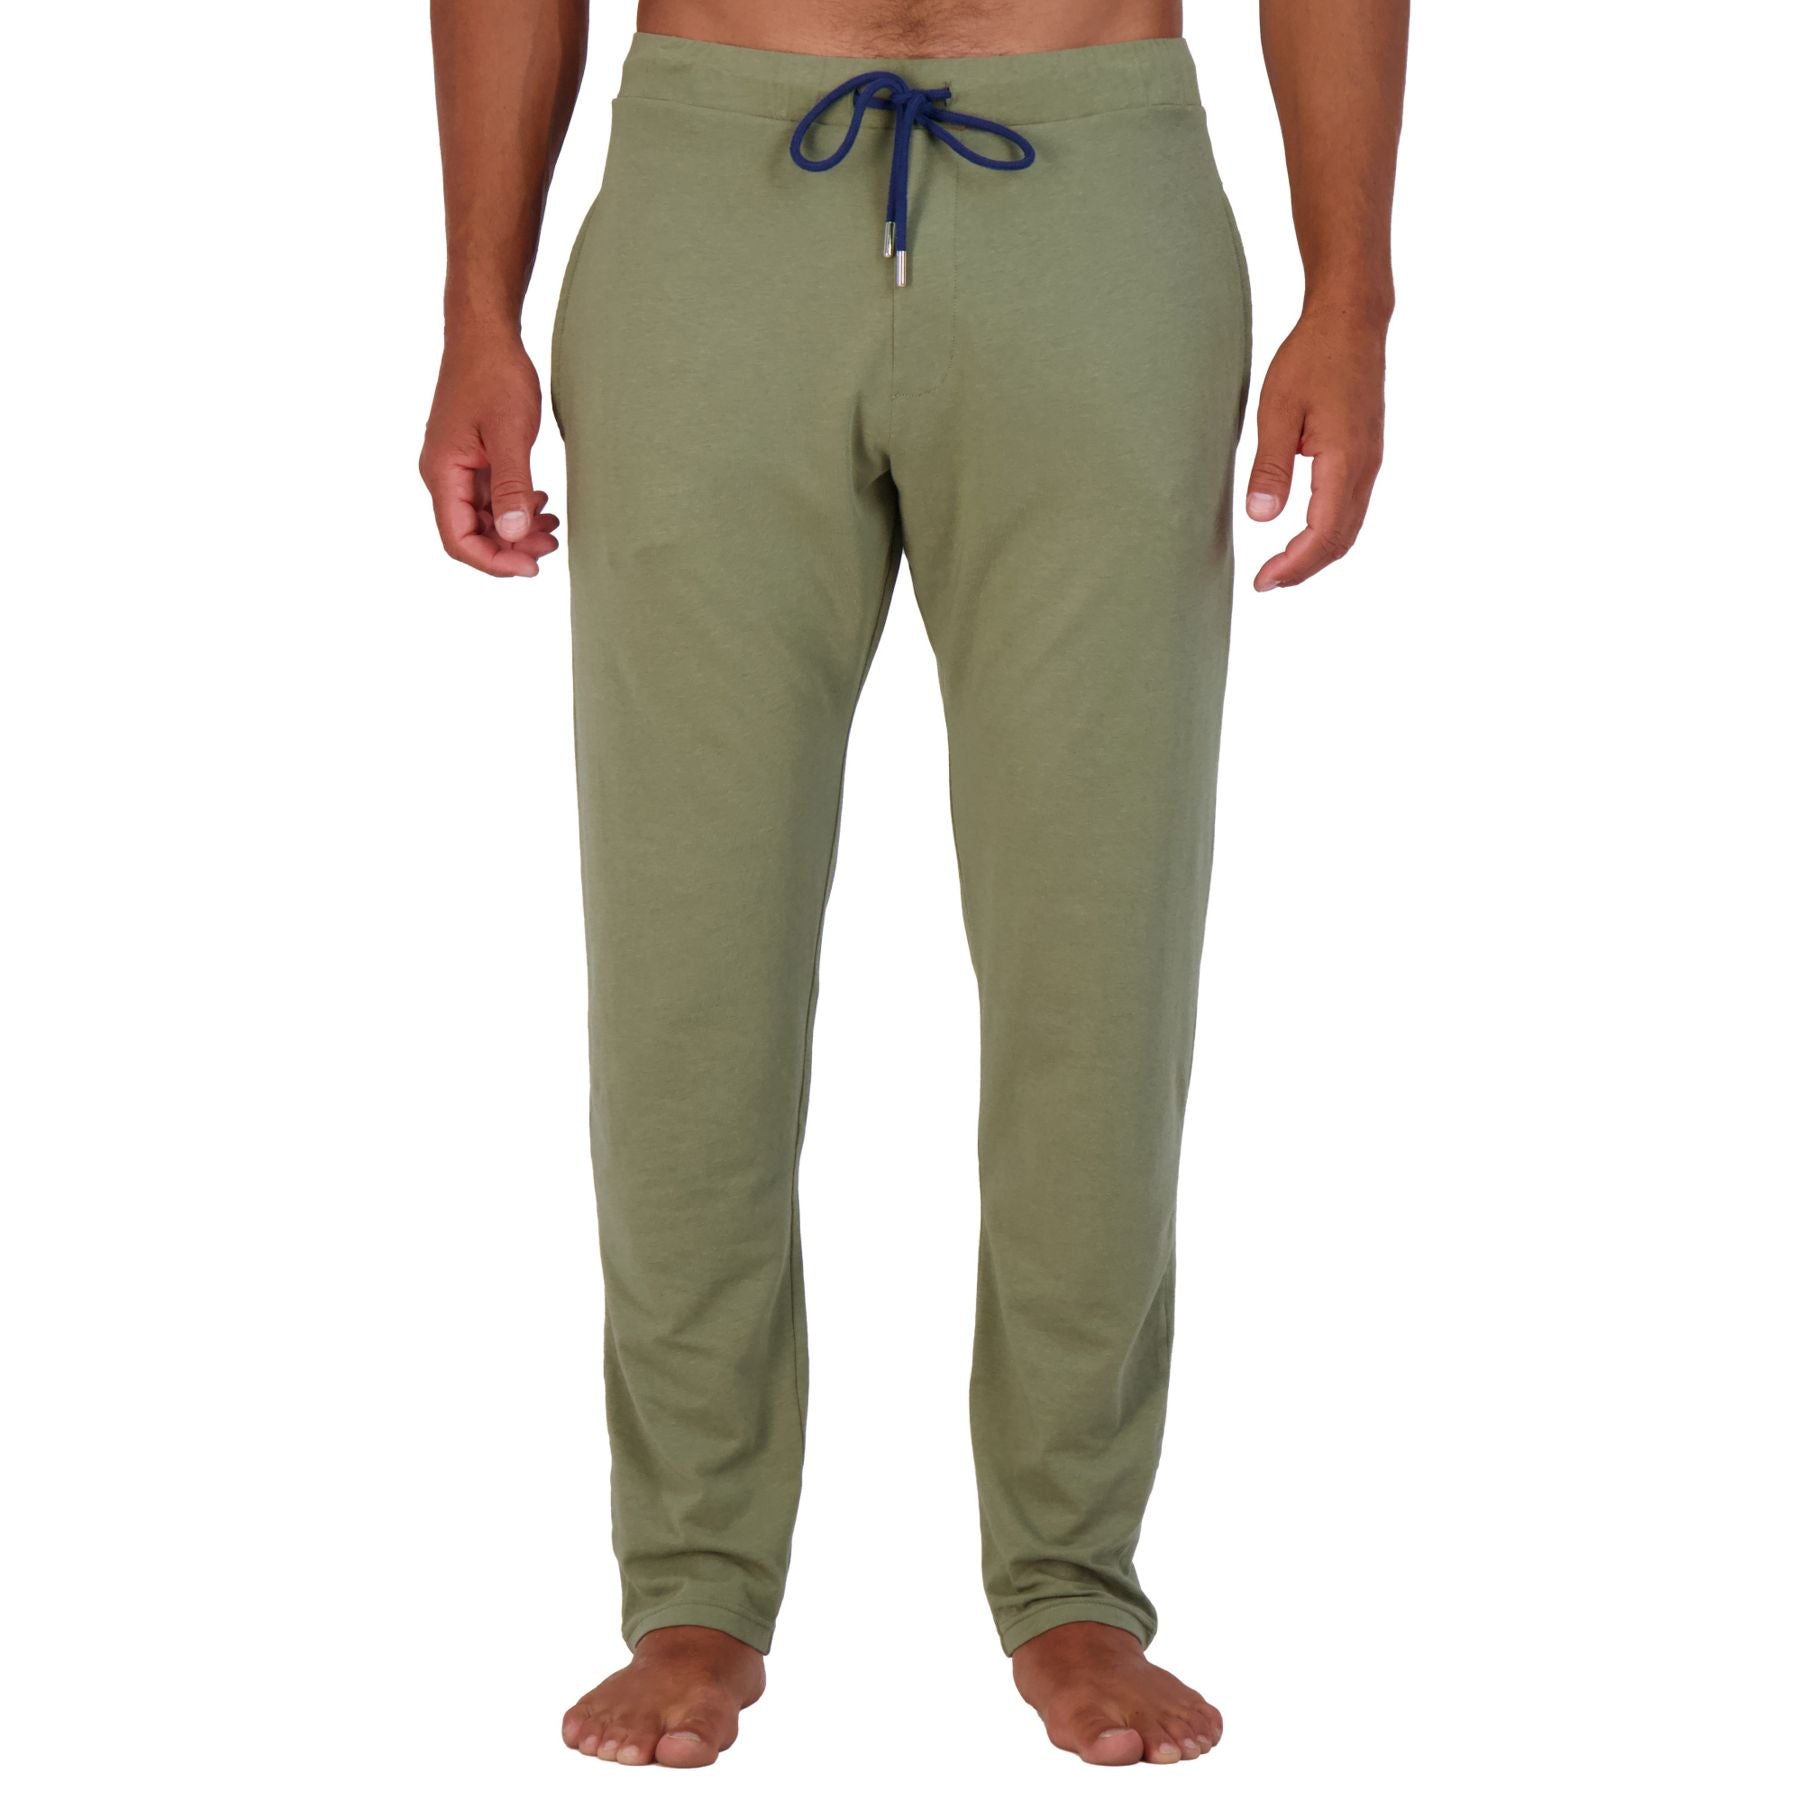 Tailored Lounge Pant in Olive by Wood Underwear